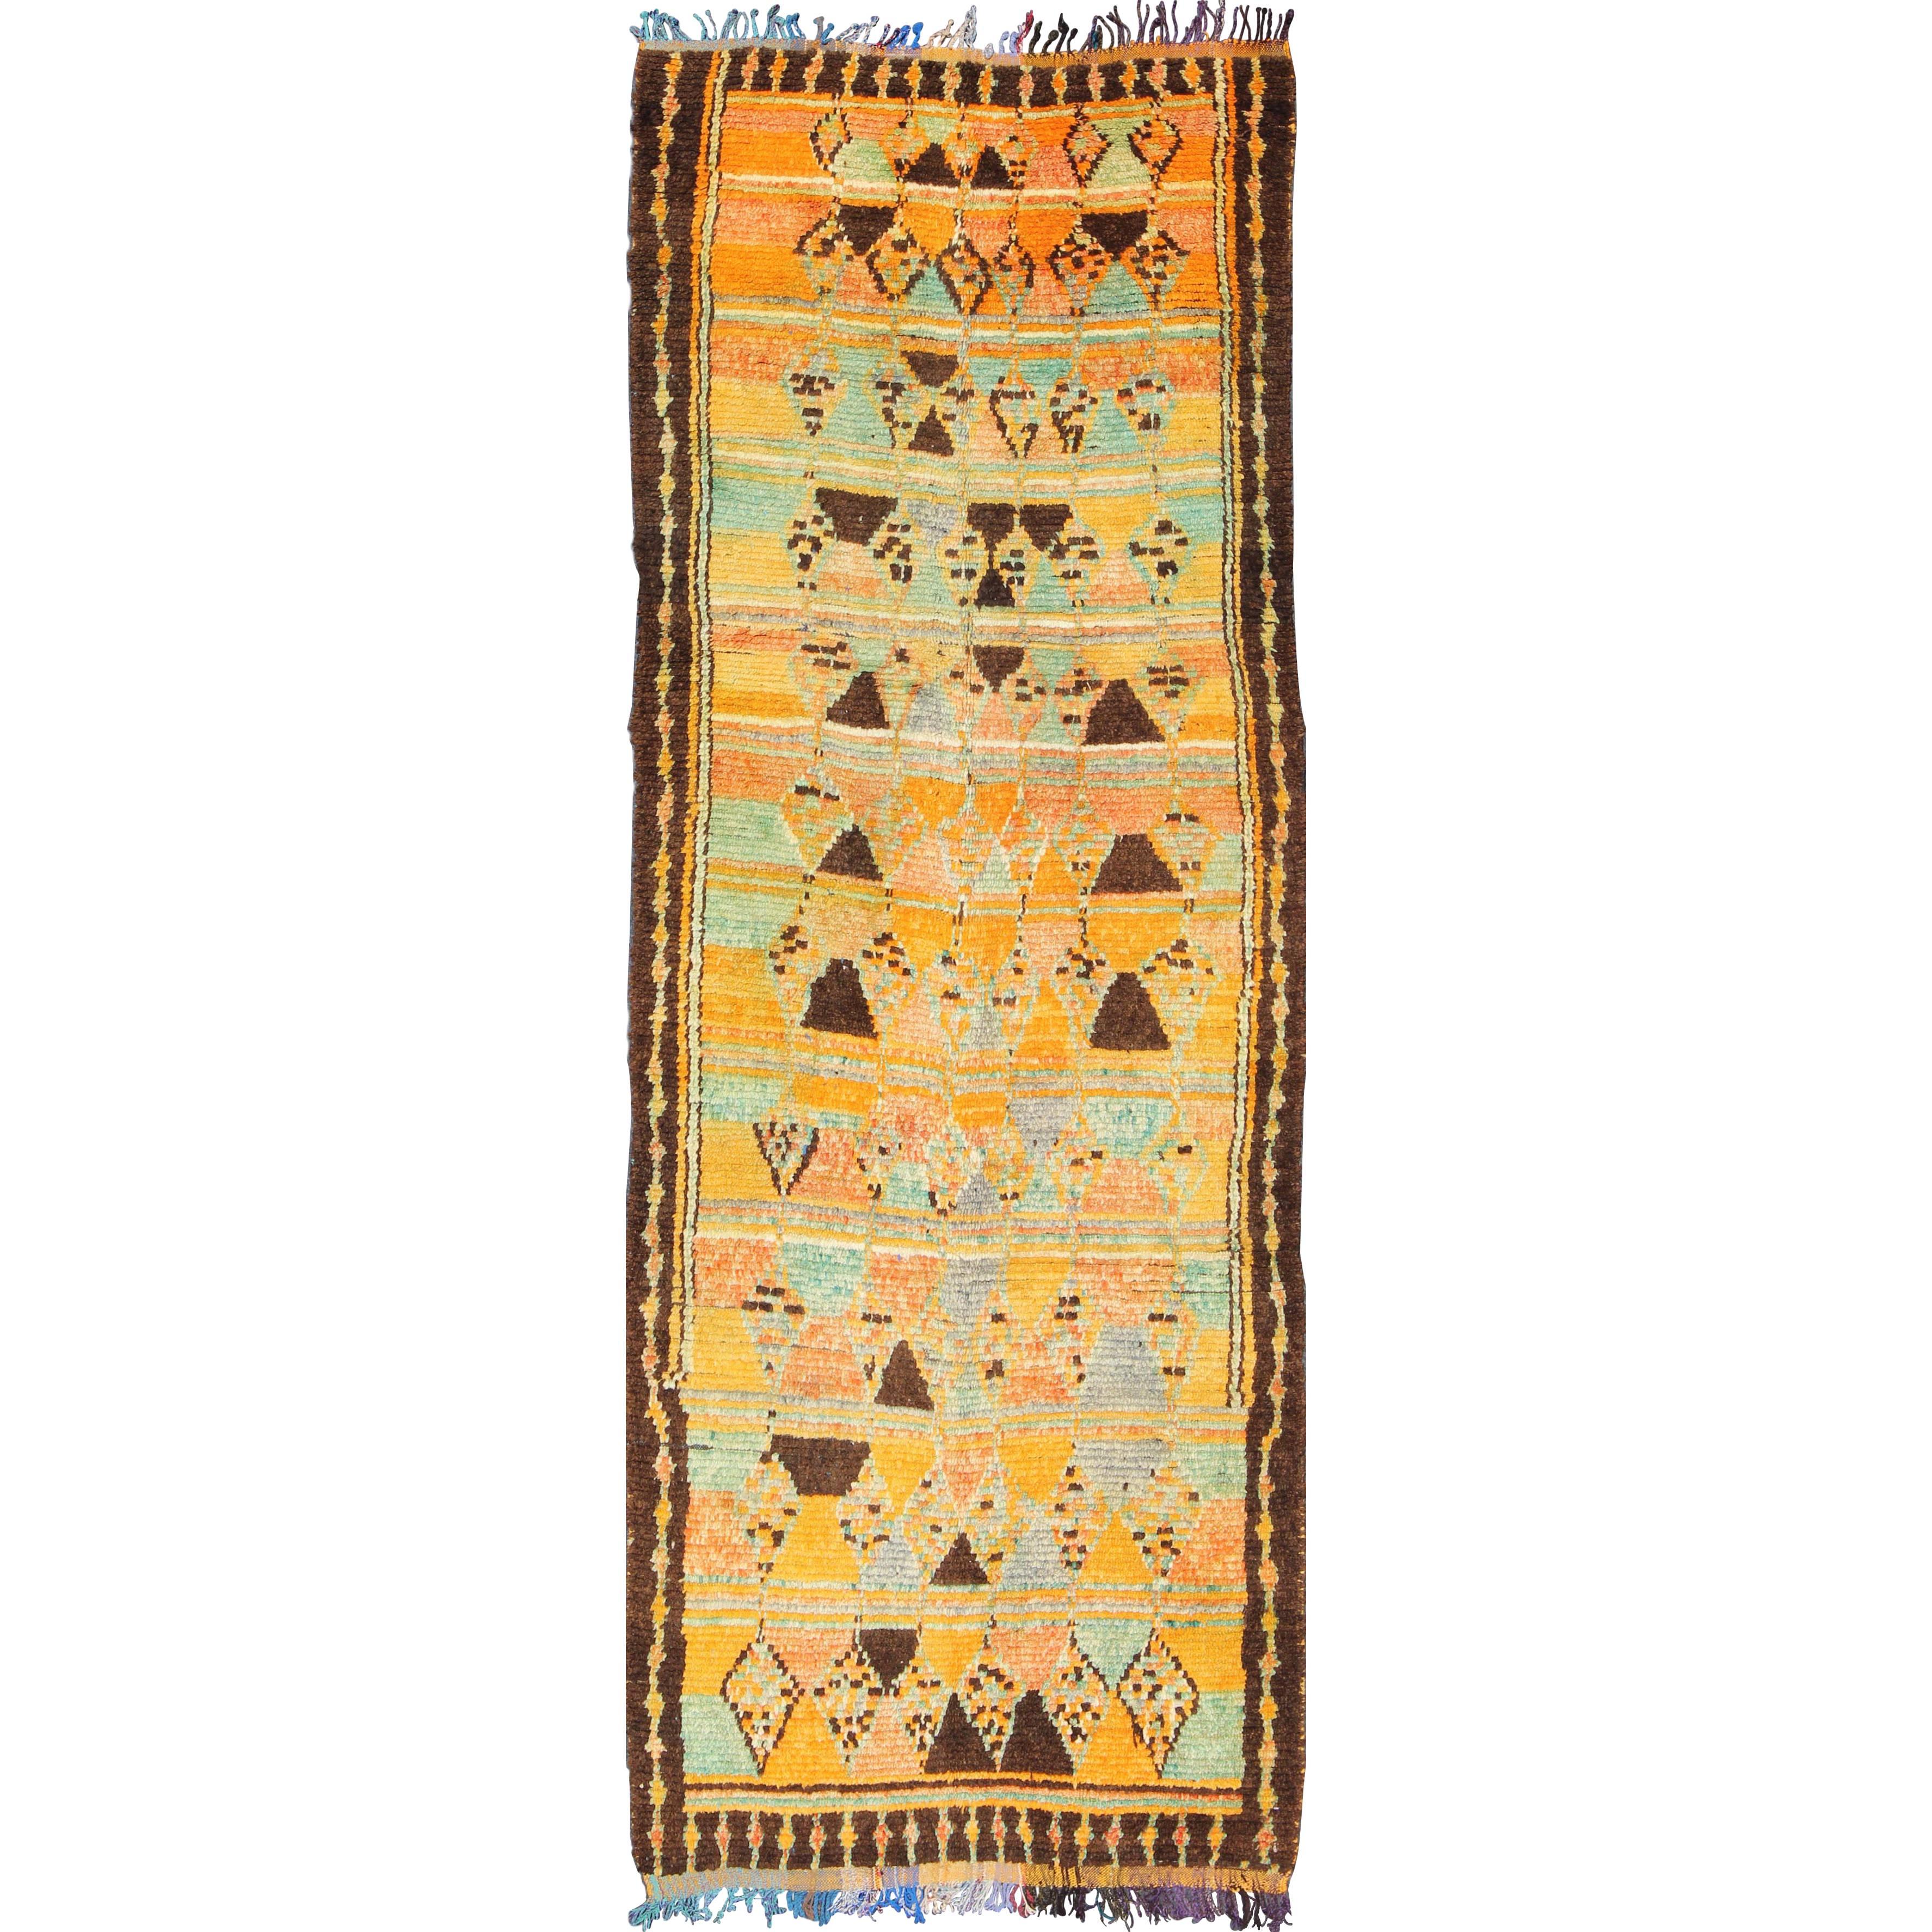 Long Vintage Moroccan Runner with Tribal Design in Orange, Brown, Blue and Green